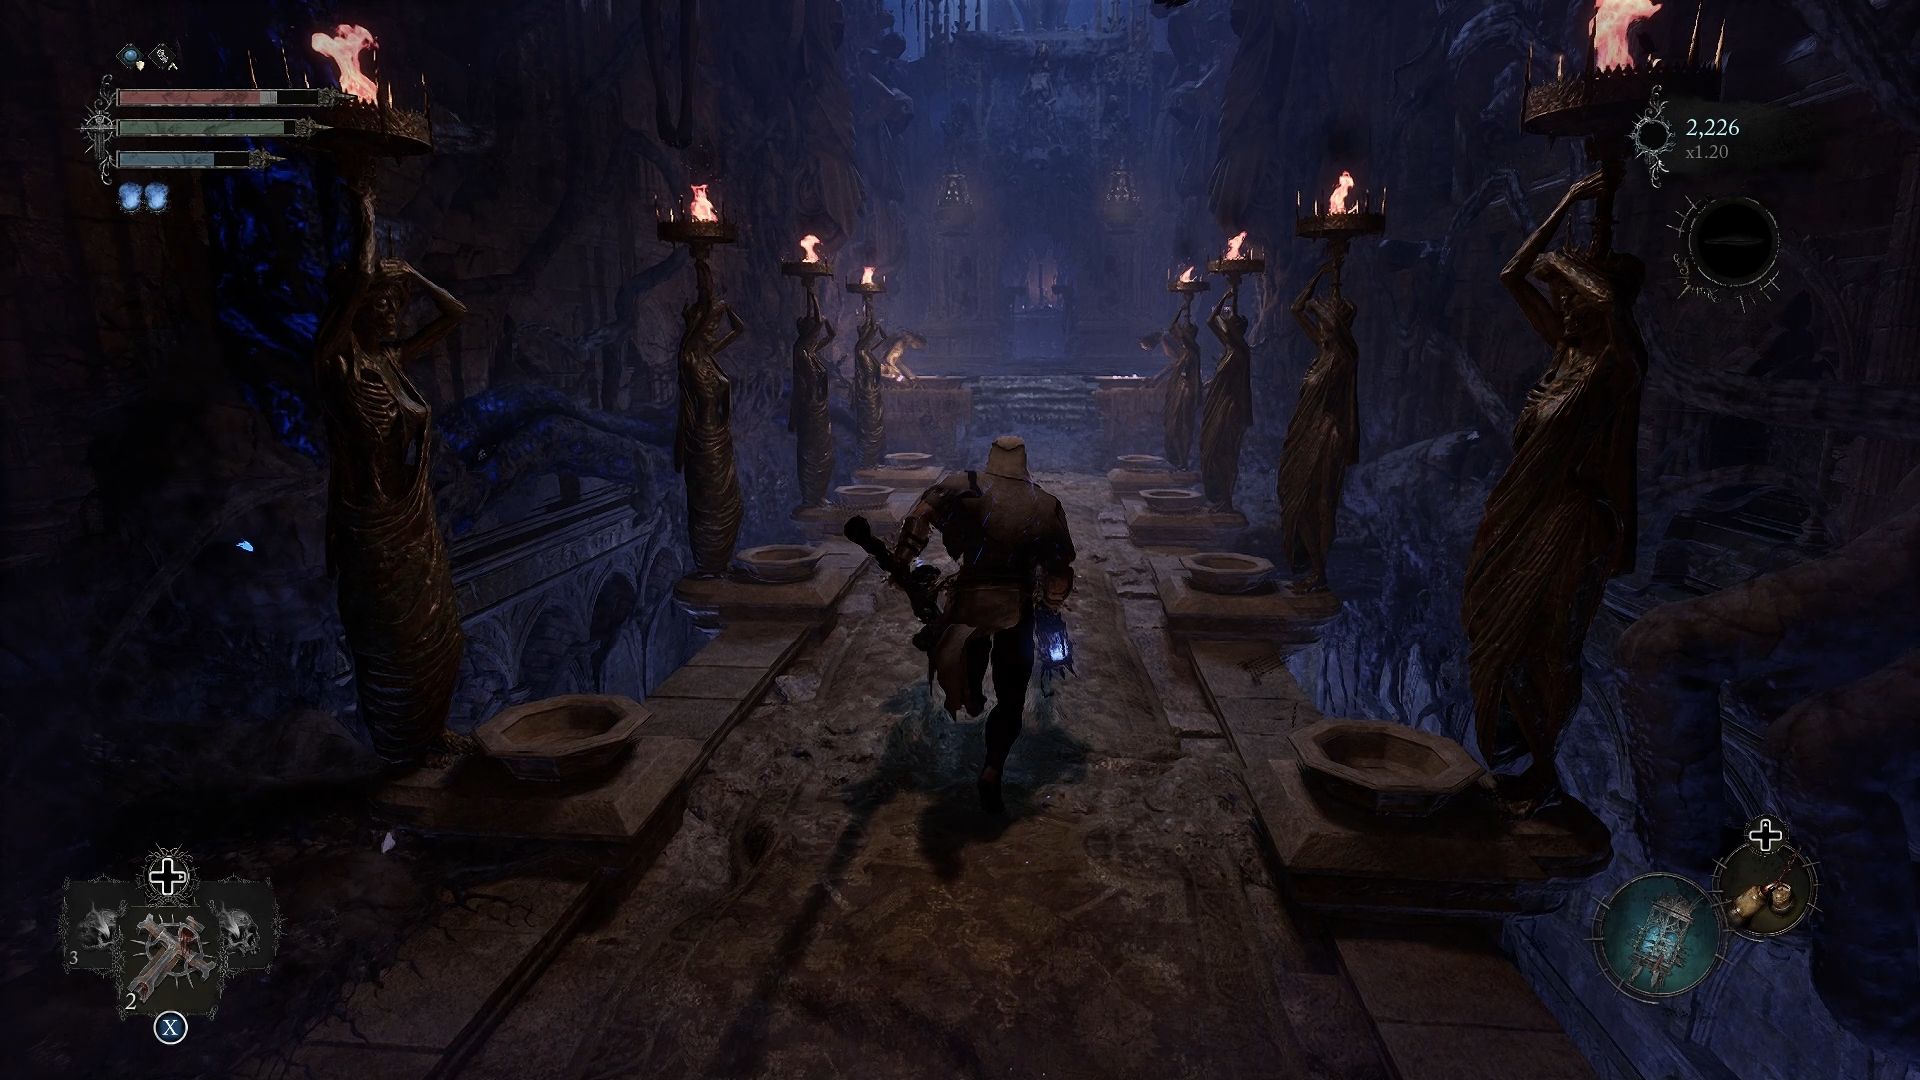 Player crossing the bridge to make his way to the Tortured Prisoner Lords of the Fallen